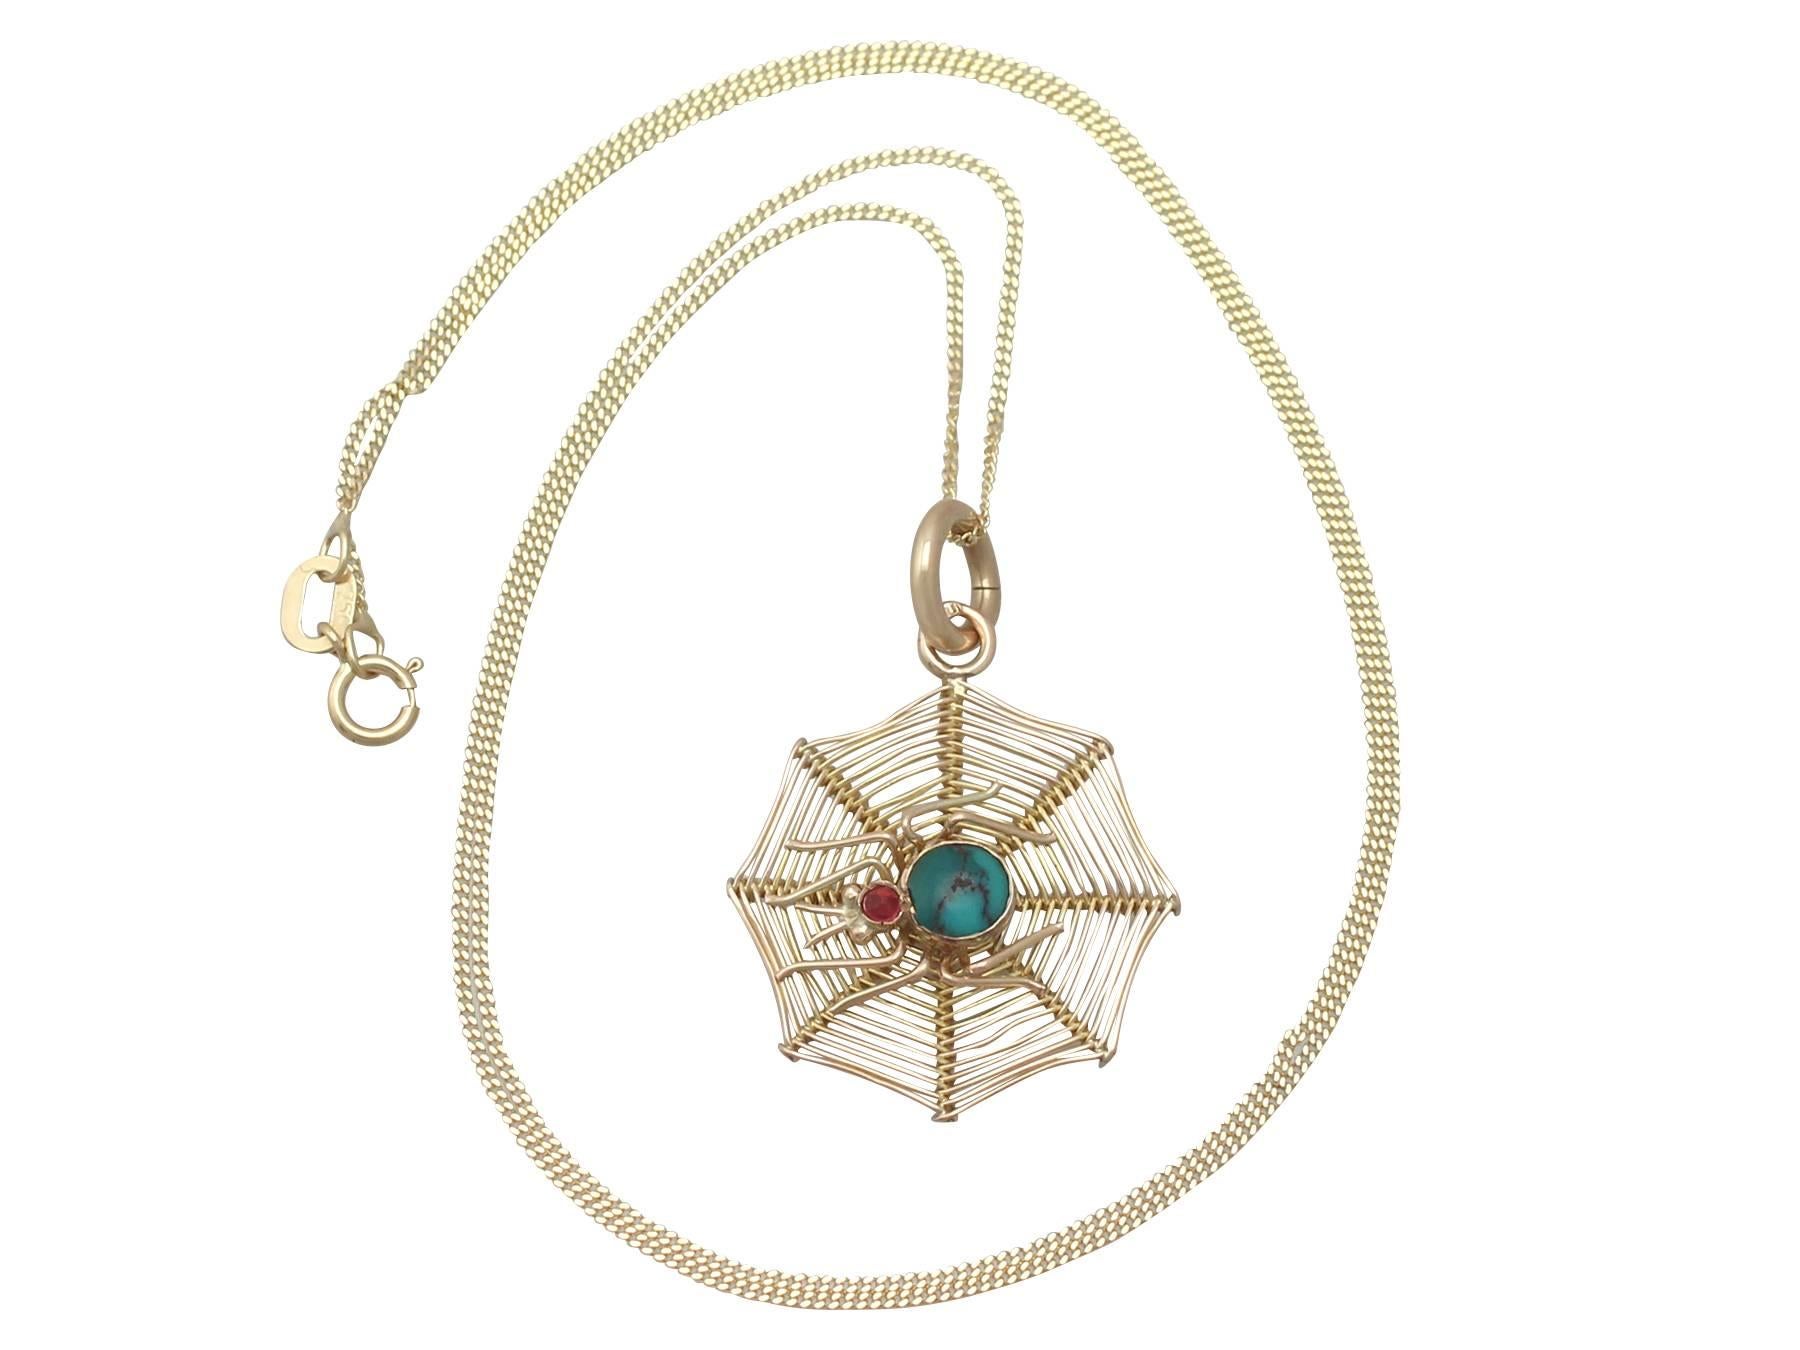 A fine and impressive antique Victorian turquoise and red paste, 9 karat yellow gold pendant in the form of a spider and web; part of our diverse antique jewellery and estate jewelry collections

This fine and impressive spiderweb pendant has been